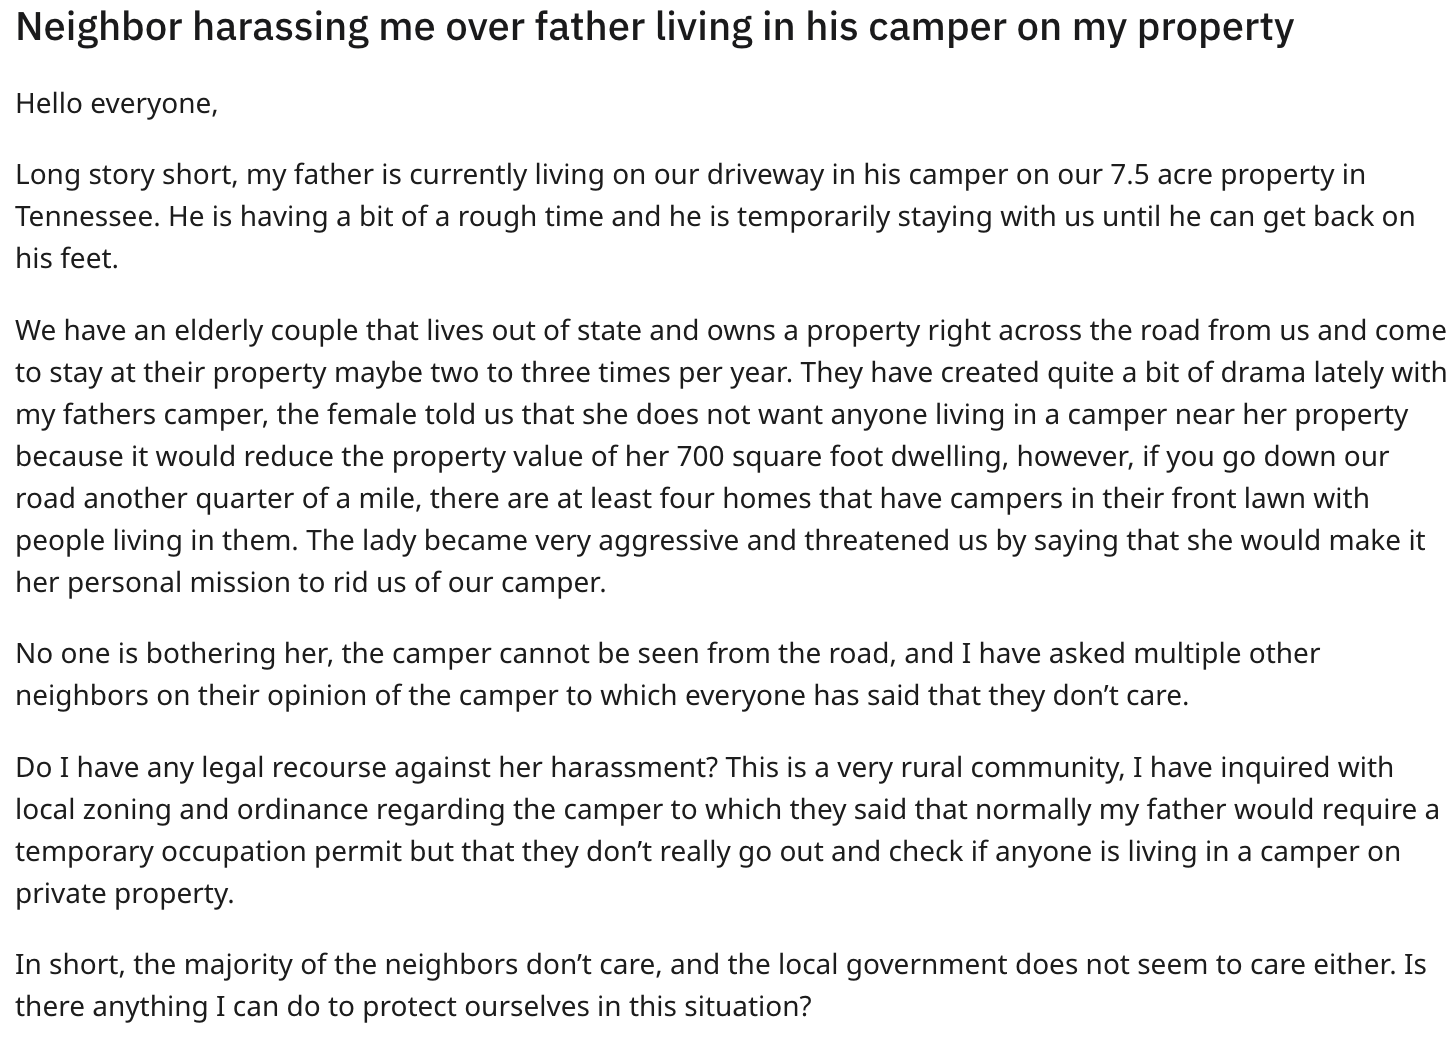 document - Neighbor harassing me over father living in his camper on my property Hello everyone, Long story short, my father is currently living on our driveway in his camper on our 7.5 acre property in Tennessee. He is having a bit of a rough time and he